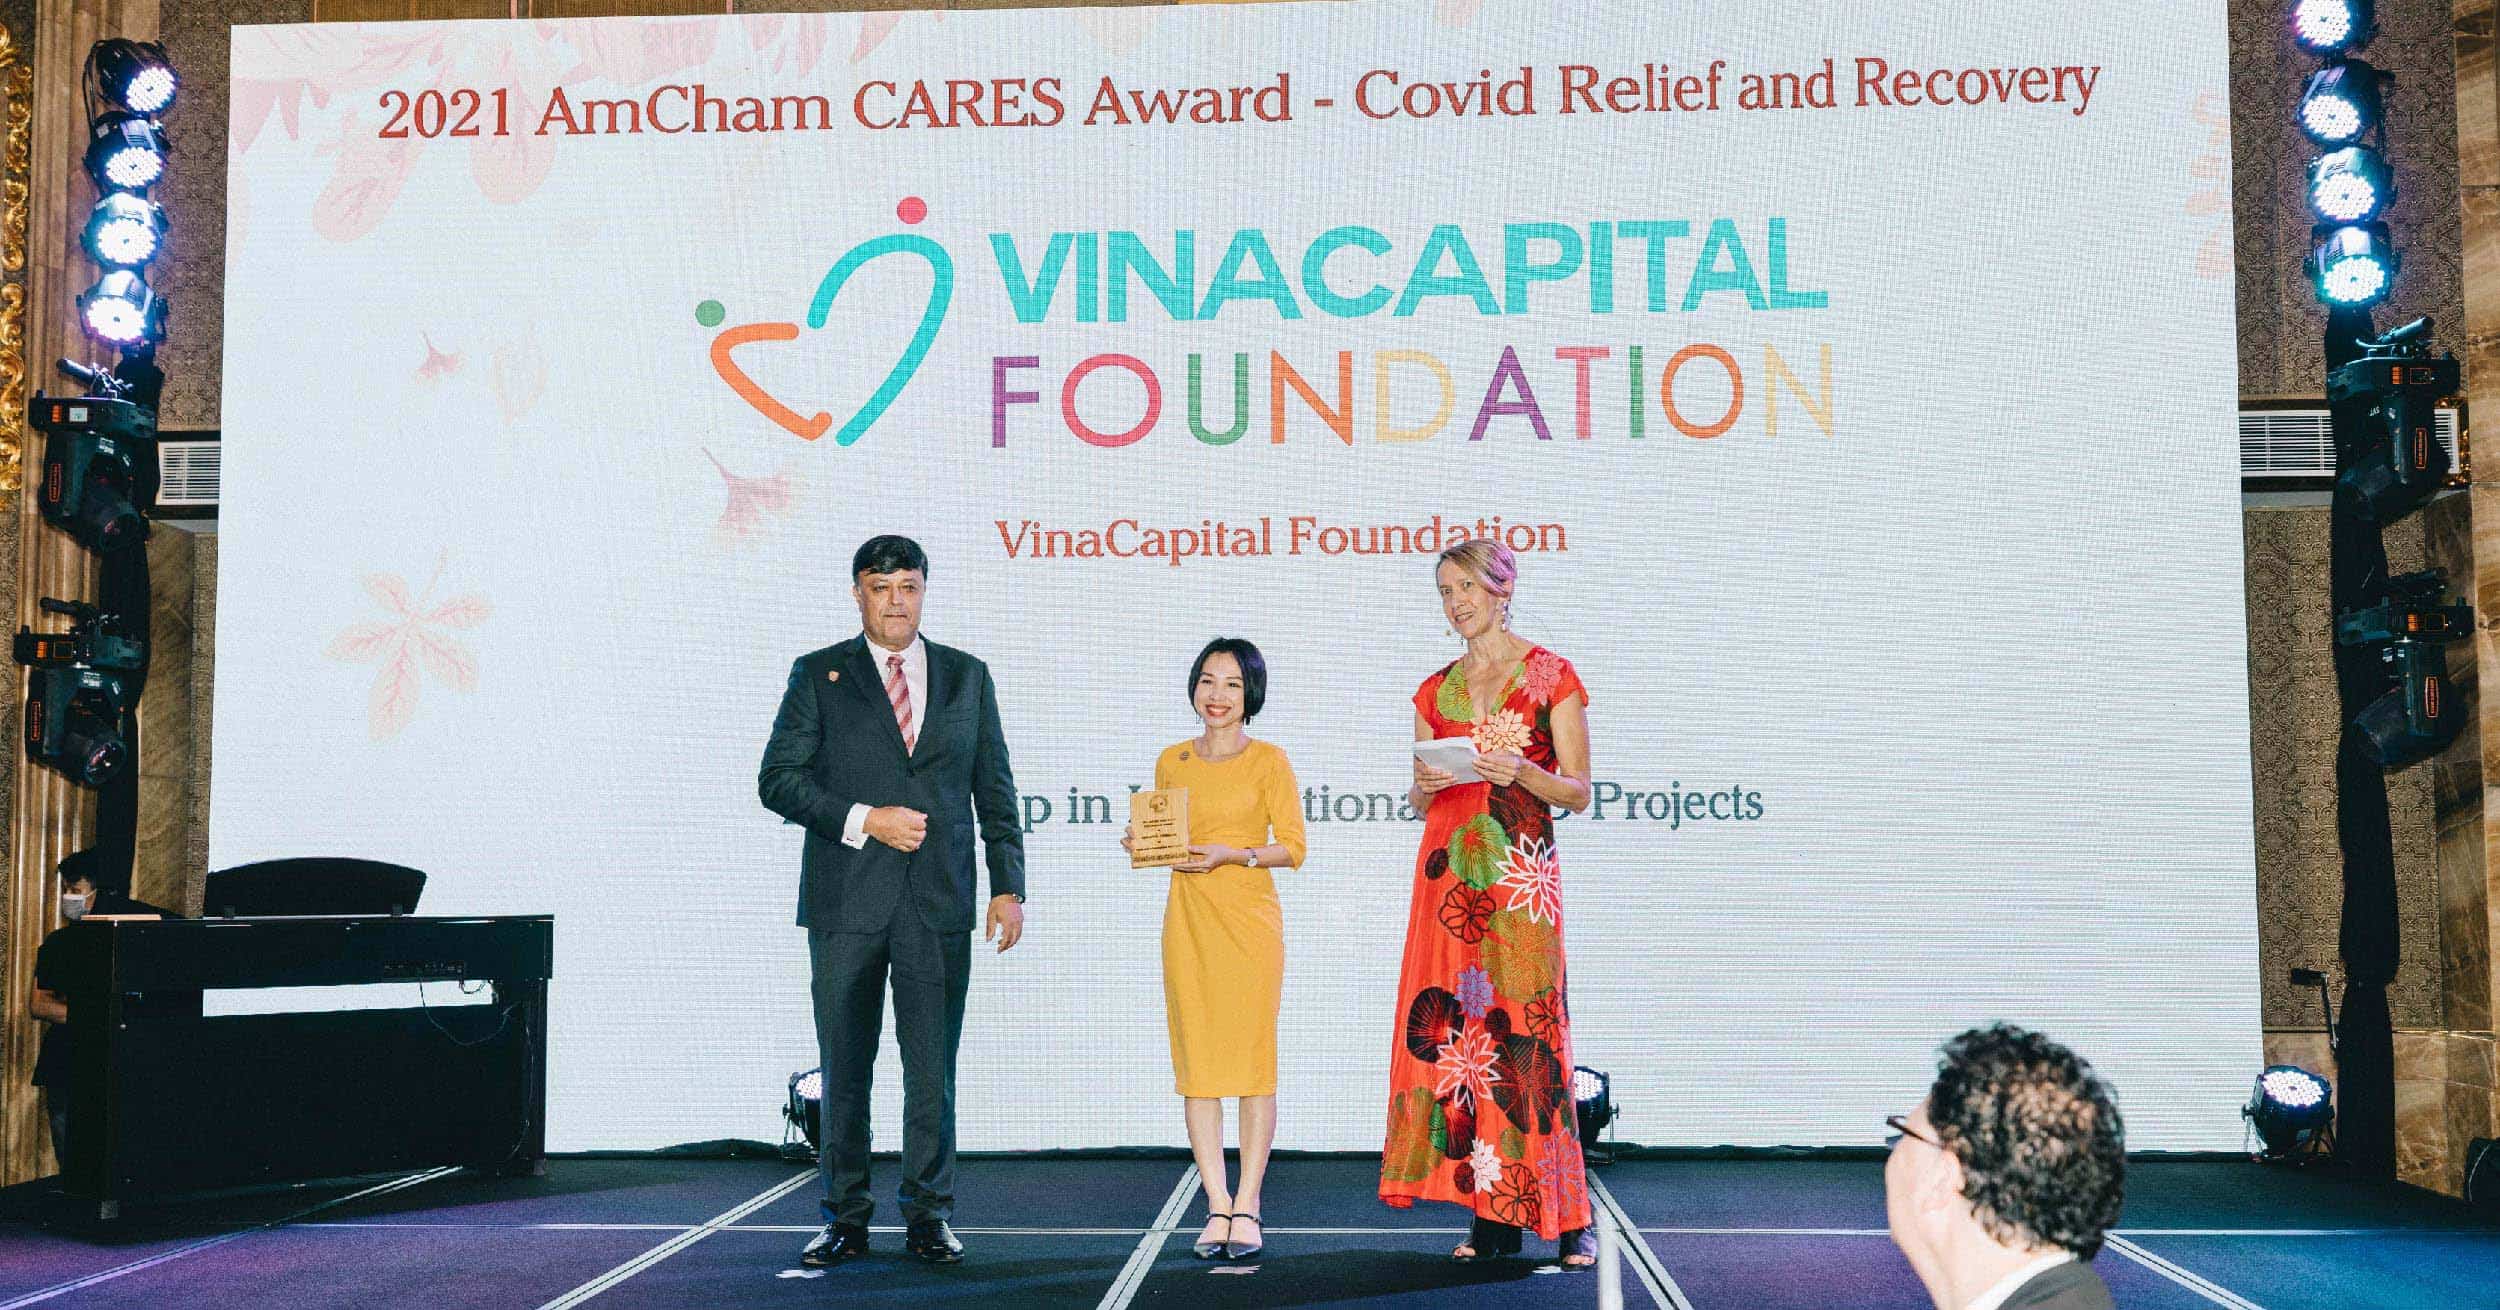 VinaCapital Foundation Receives 2021 Amcham Cares Award for Covid Relief and Recovery